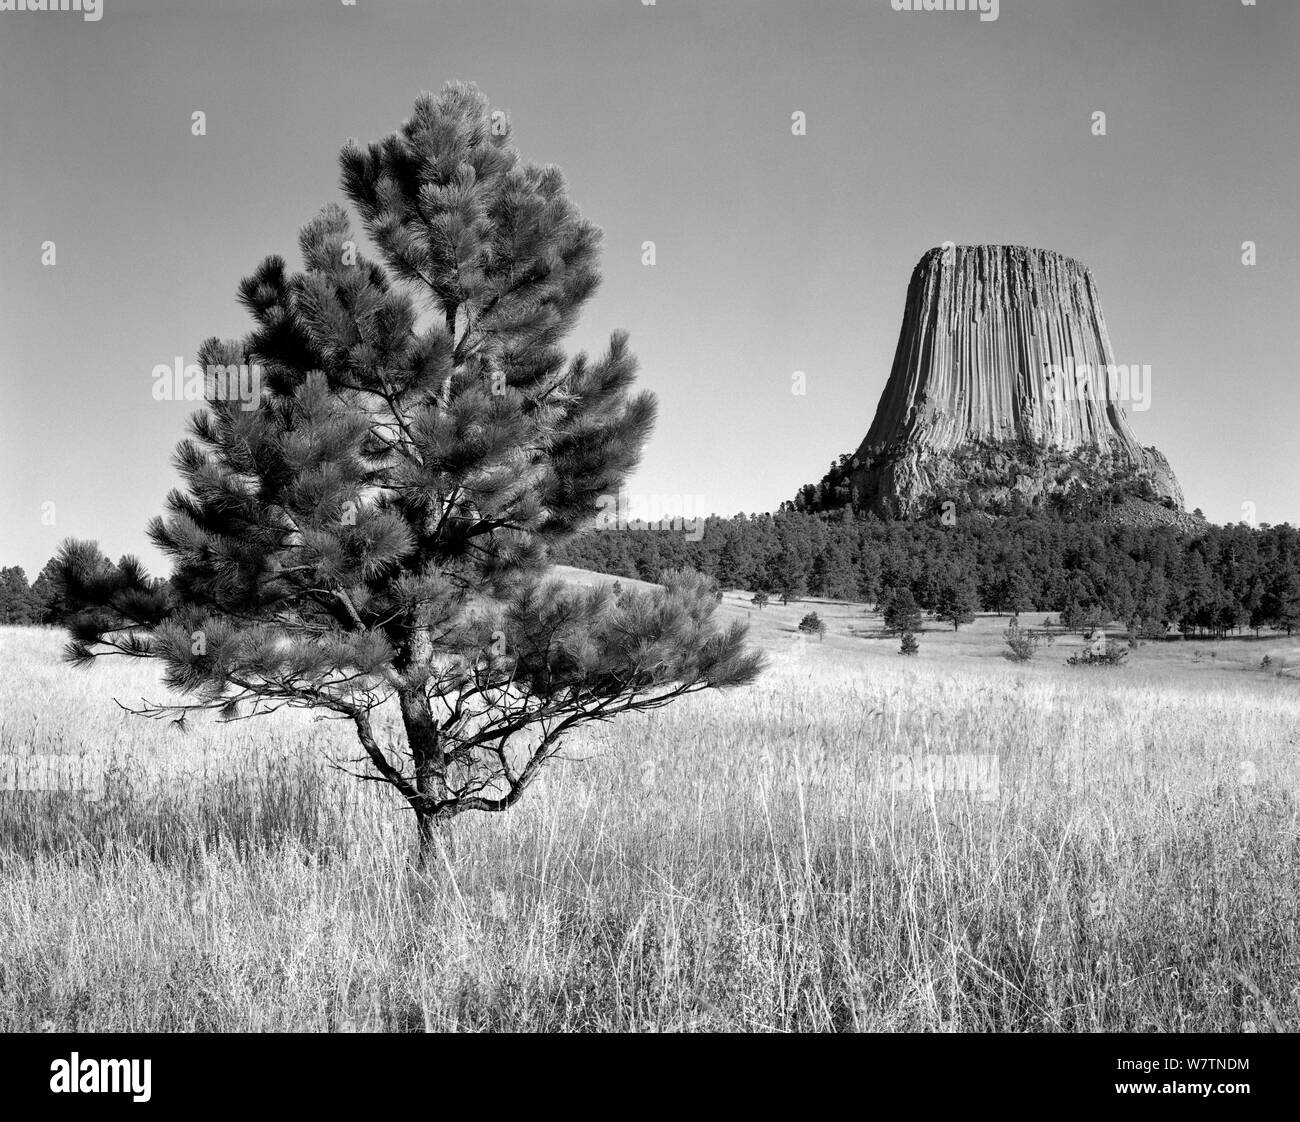 Black and white photograph of Devils Tower in Devils Tower National Monument, Wyoming, USA. Stock Photo